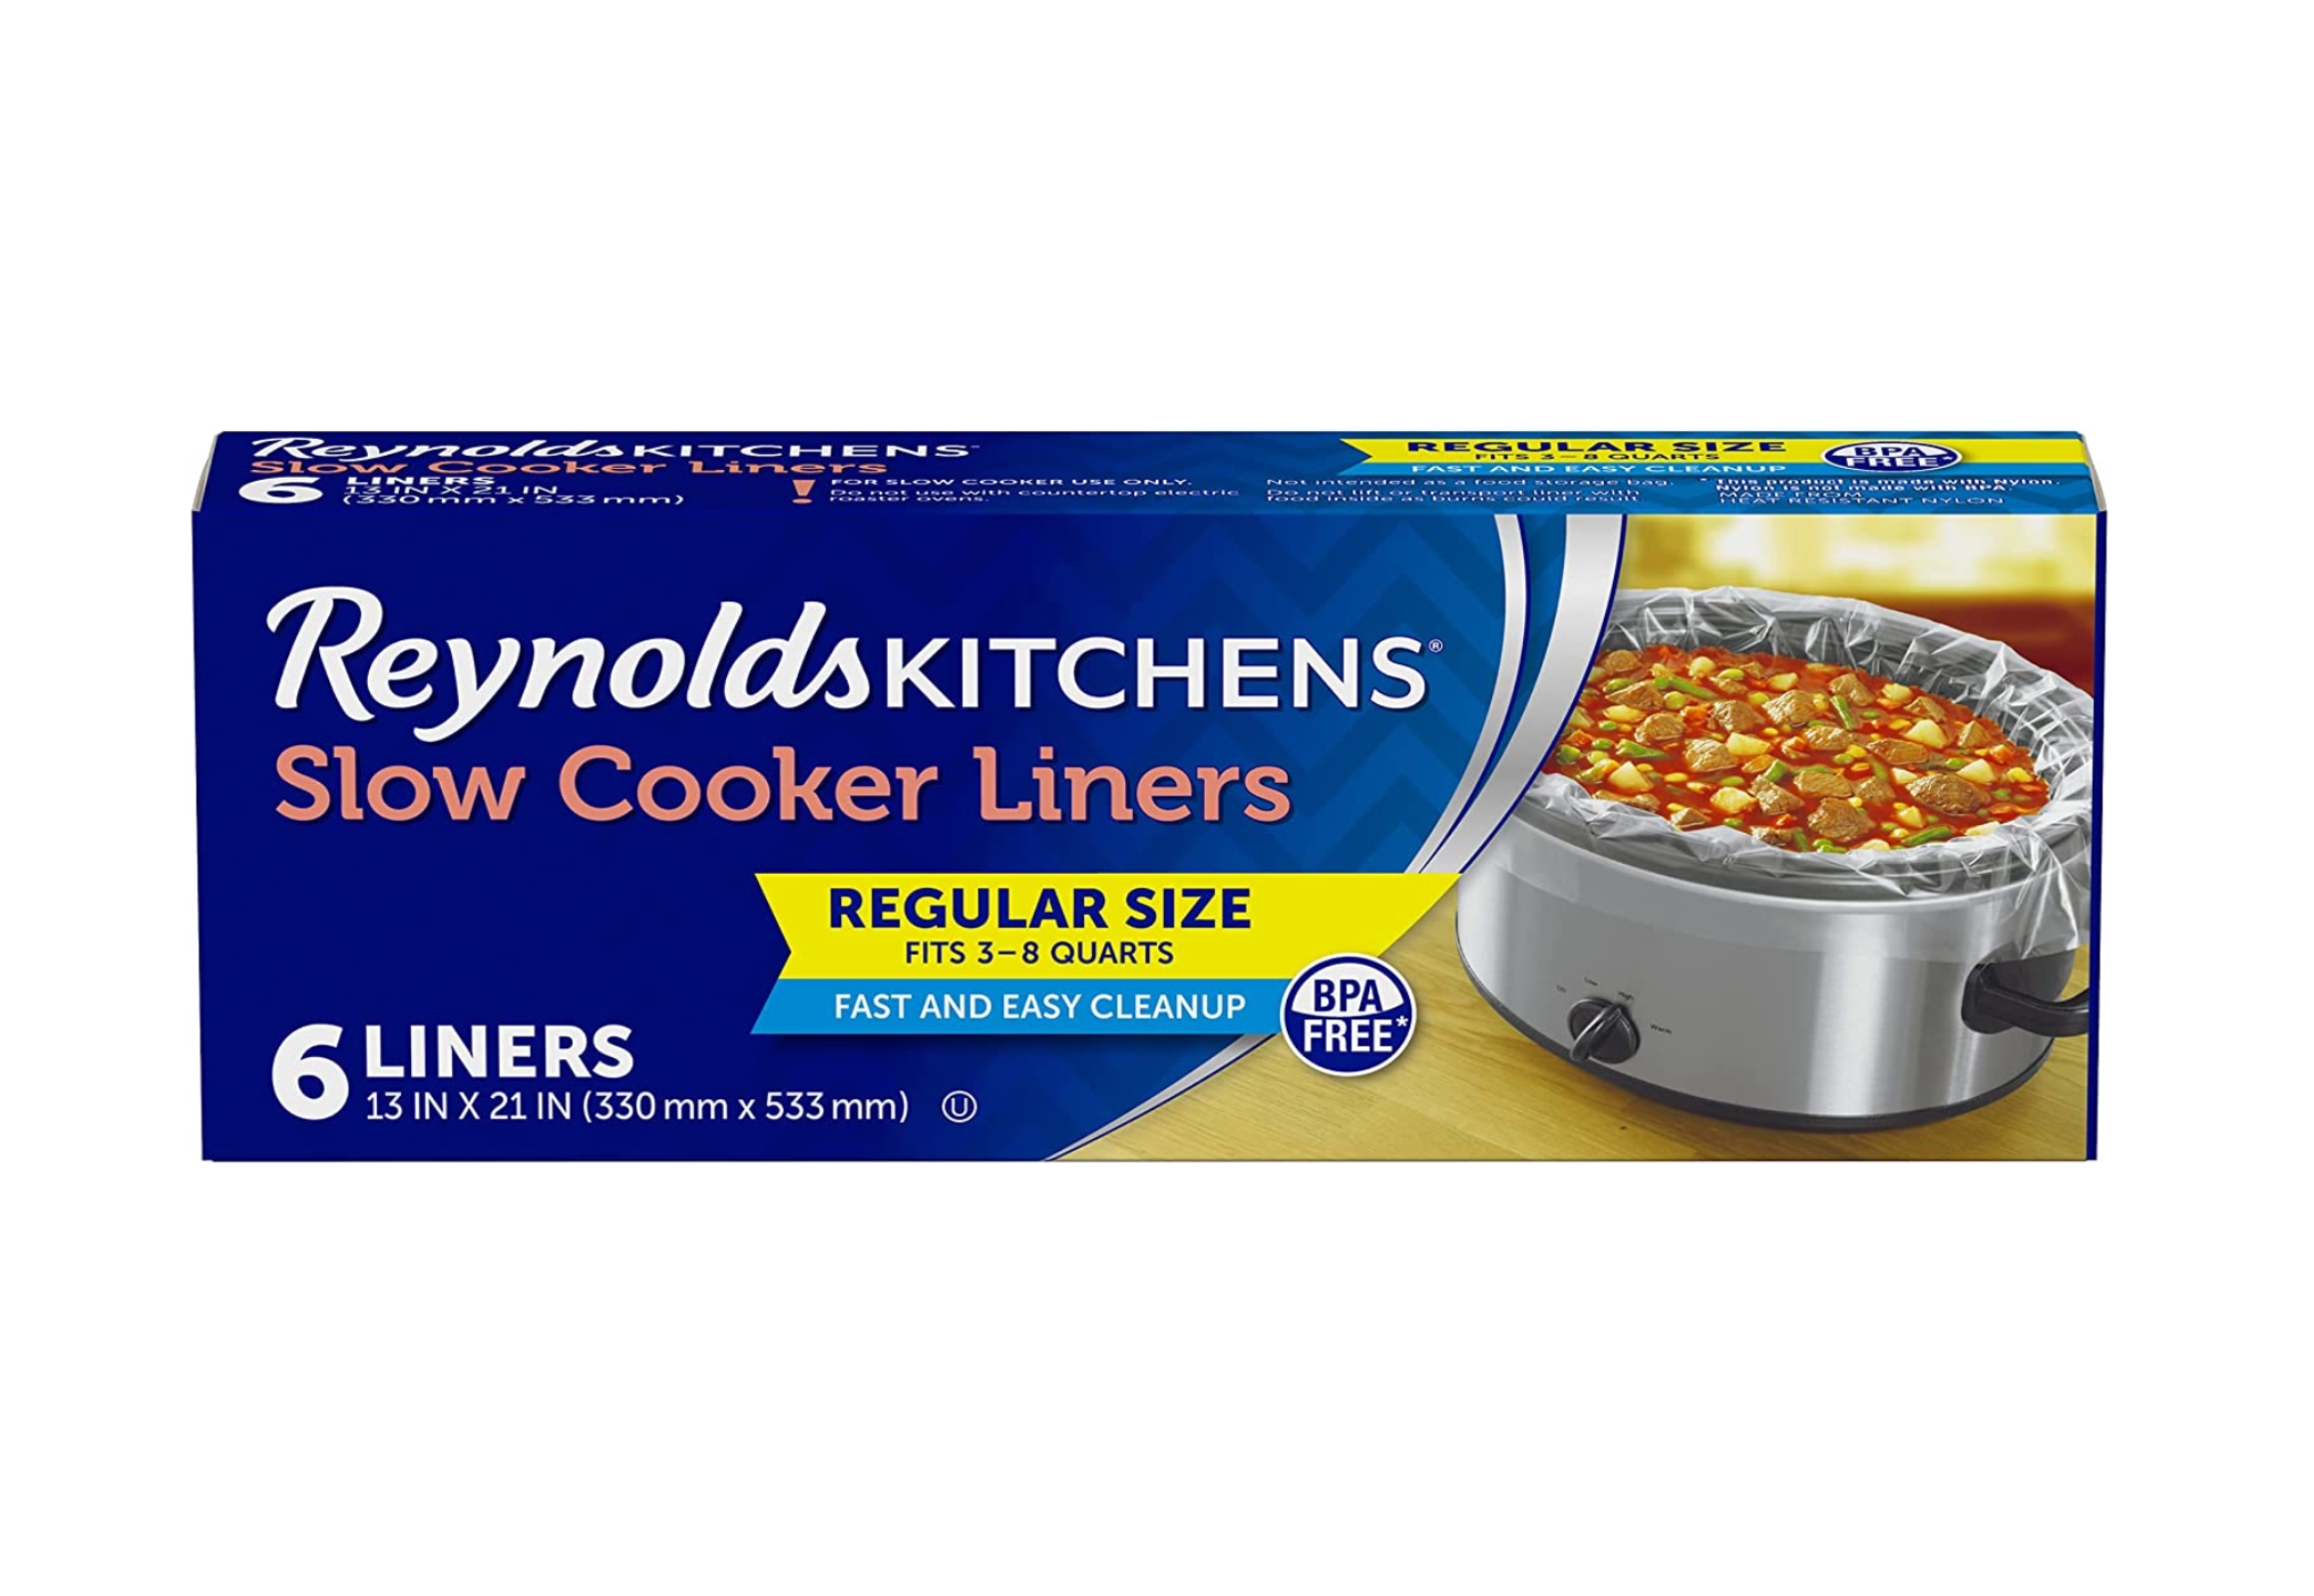 18 Crockpot Ideas: DIY Divider, Liner, and More Great Ideas - The Krazy  Coupon Lady